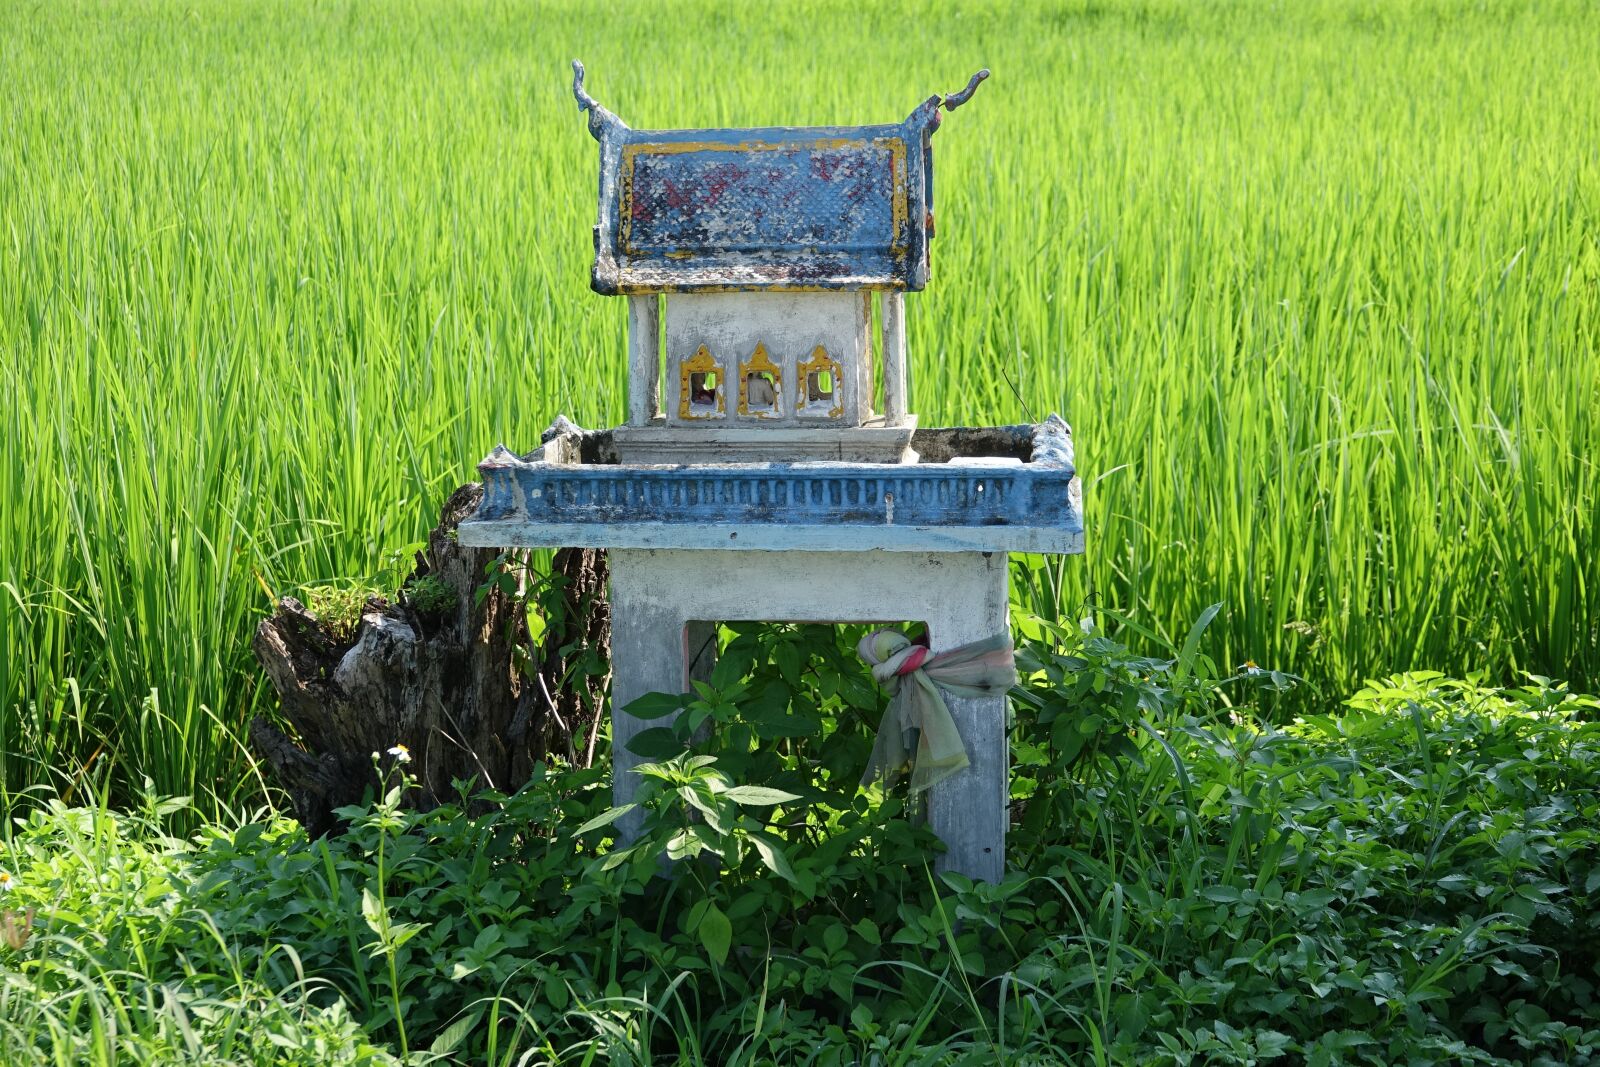 Sony Cyber-shot DSC-RX10 III sample photo. Temple, rice field, thailand photography